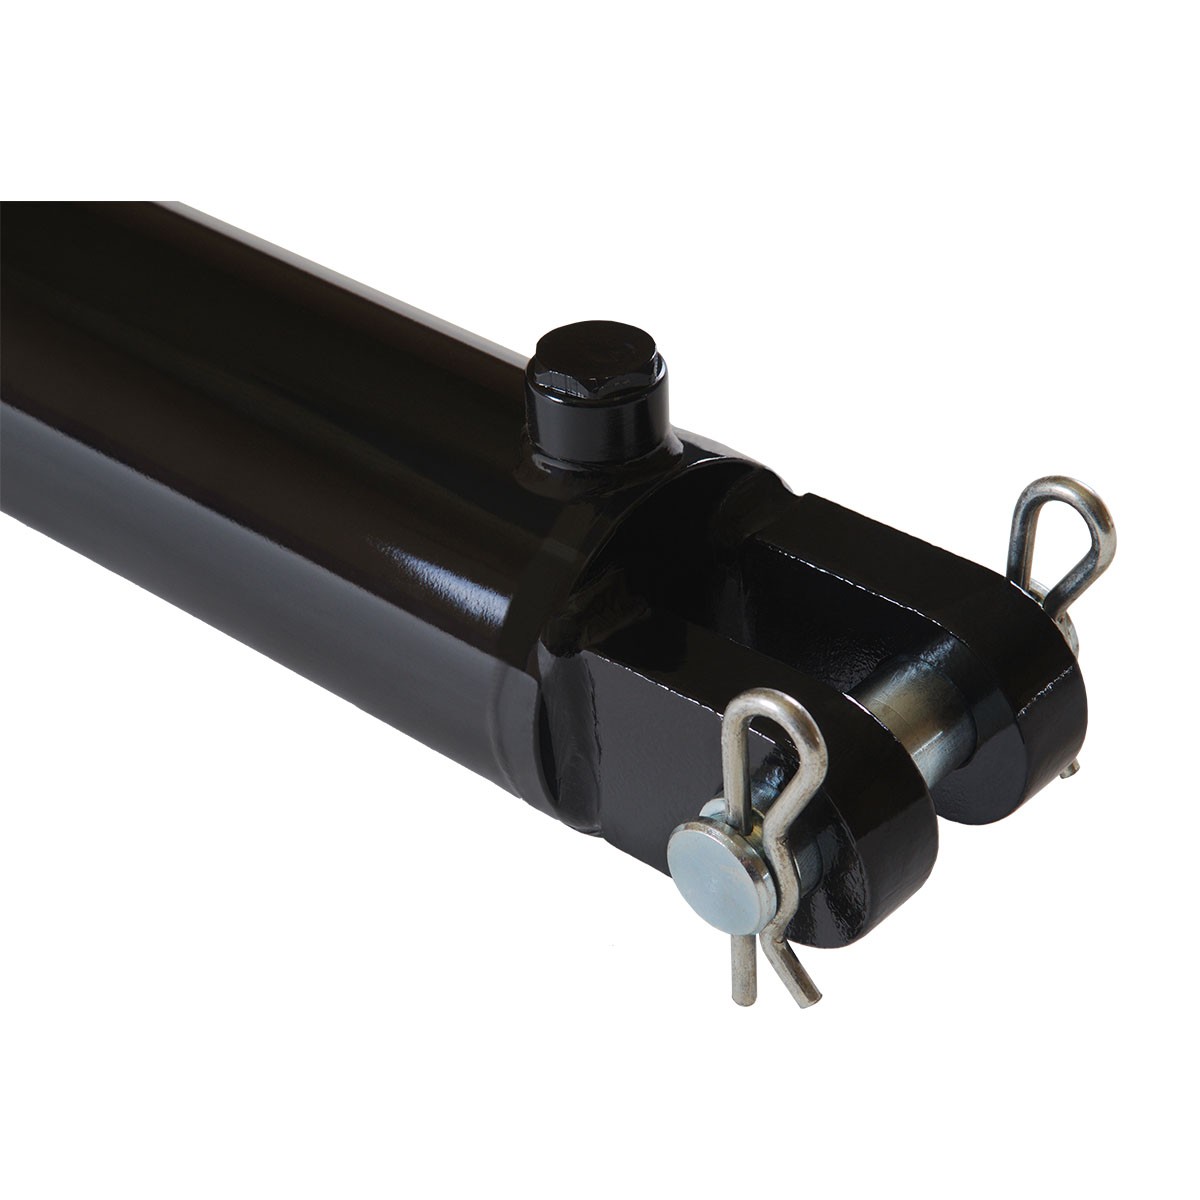 3" bore x 8" ASAE stroke clevis hydraulic cylinder